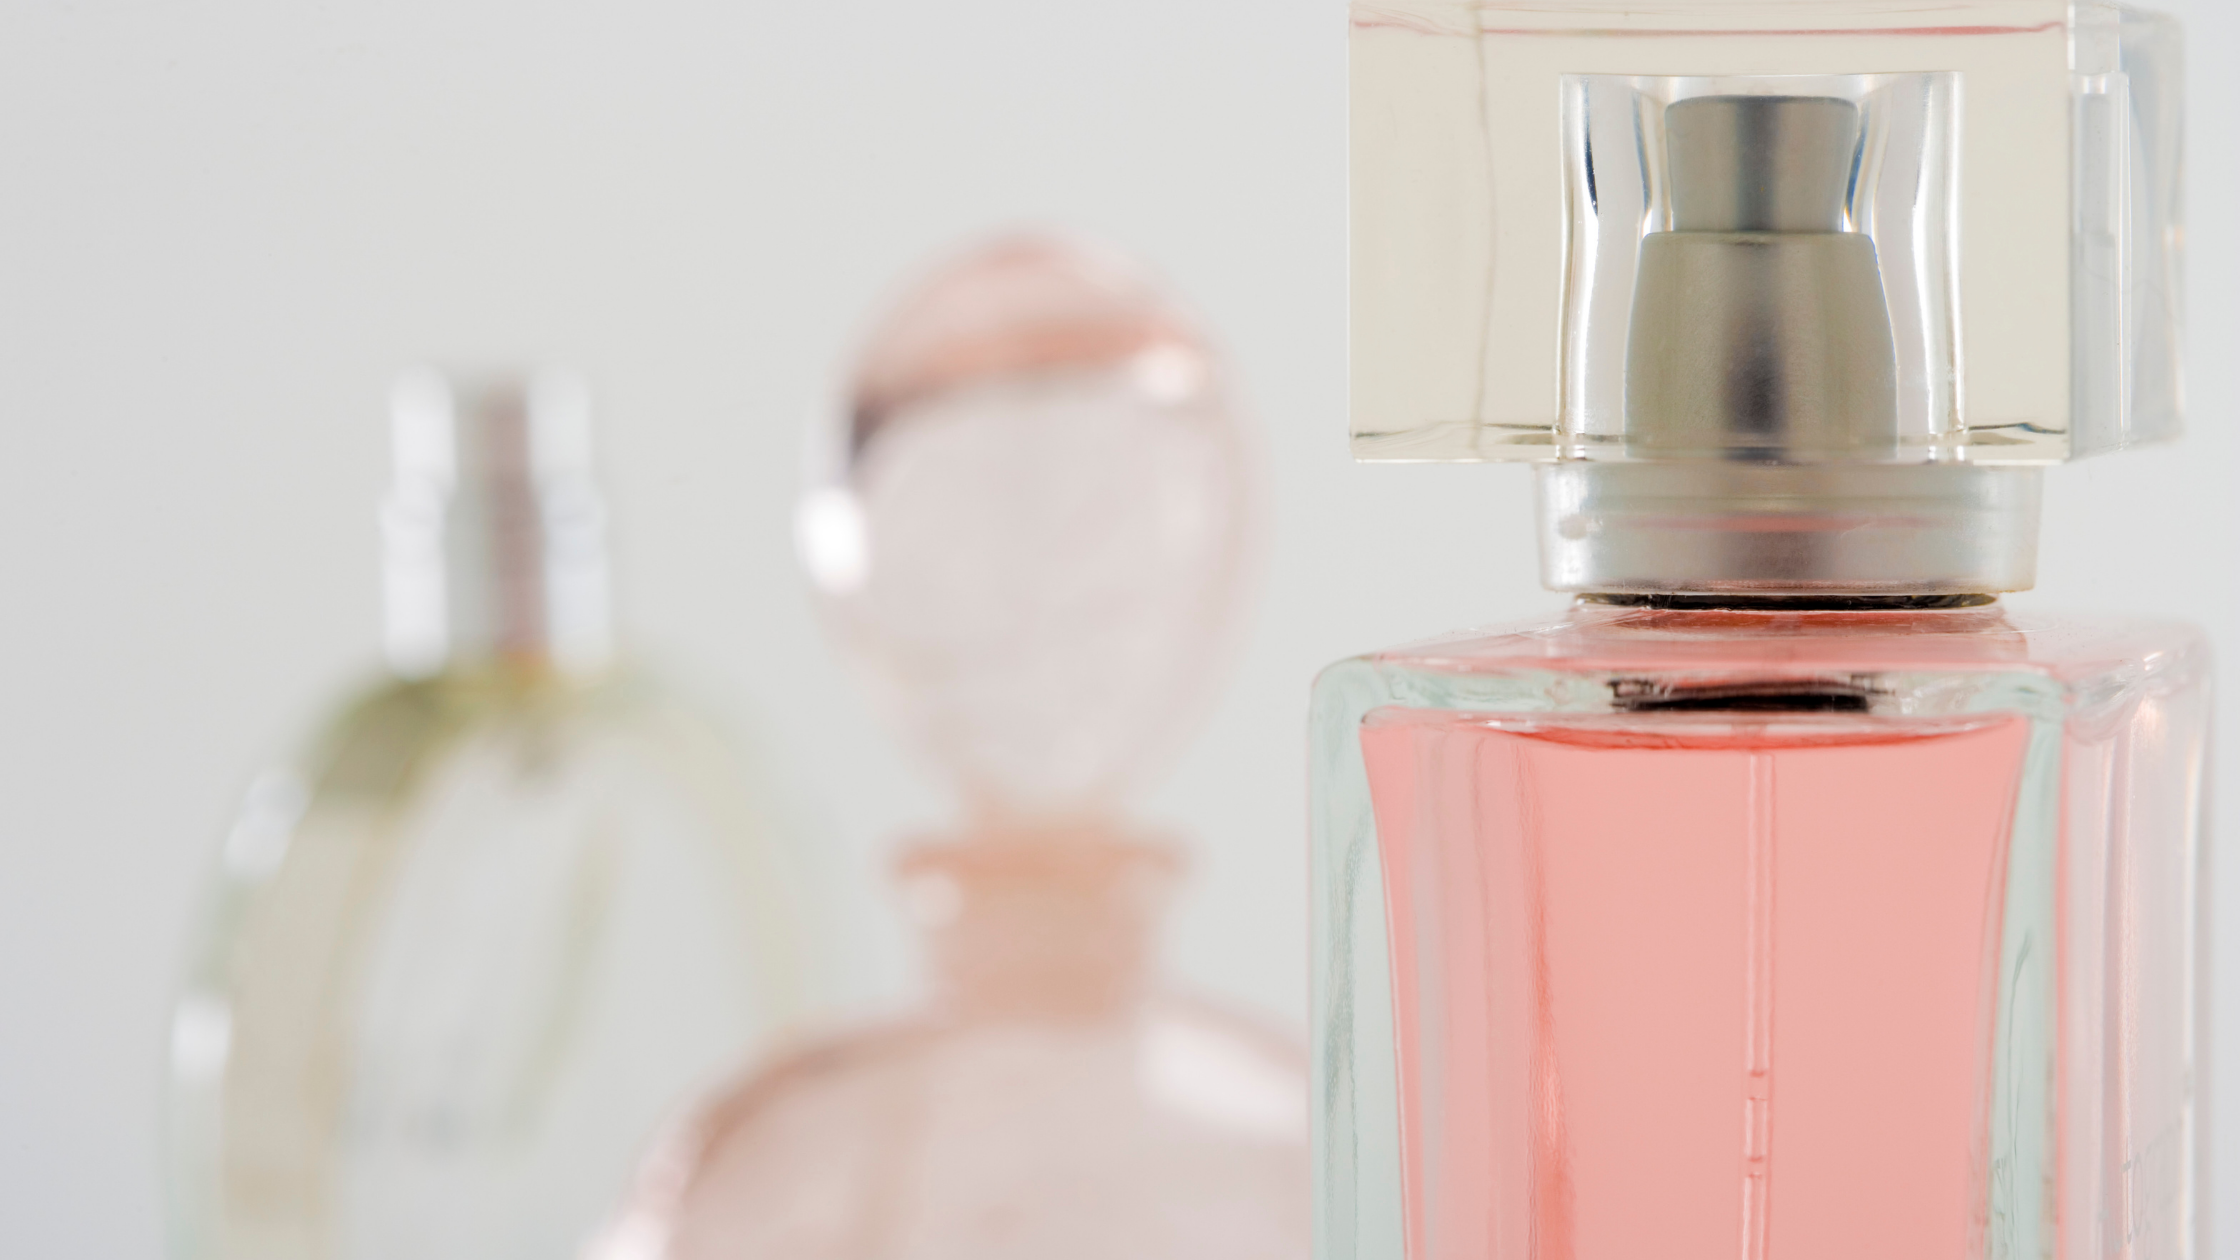 The 7 Best Sites for Buying Cologne Online - The Modest Man